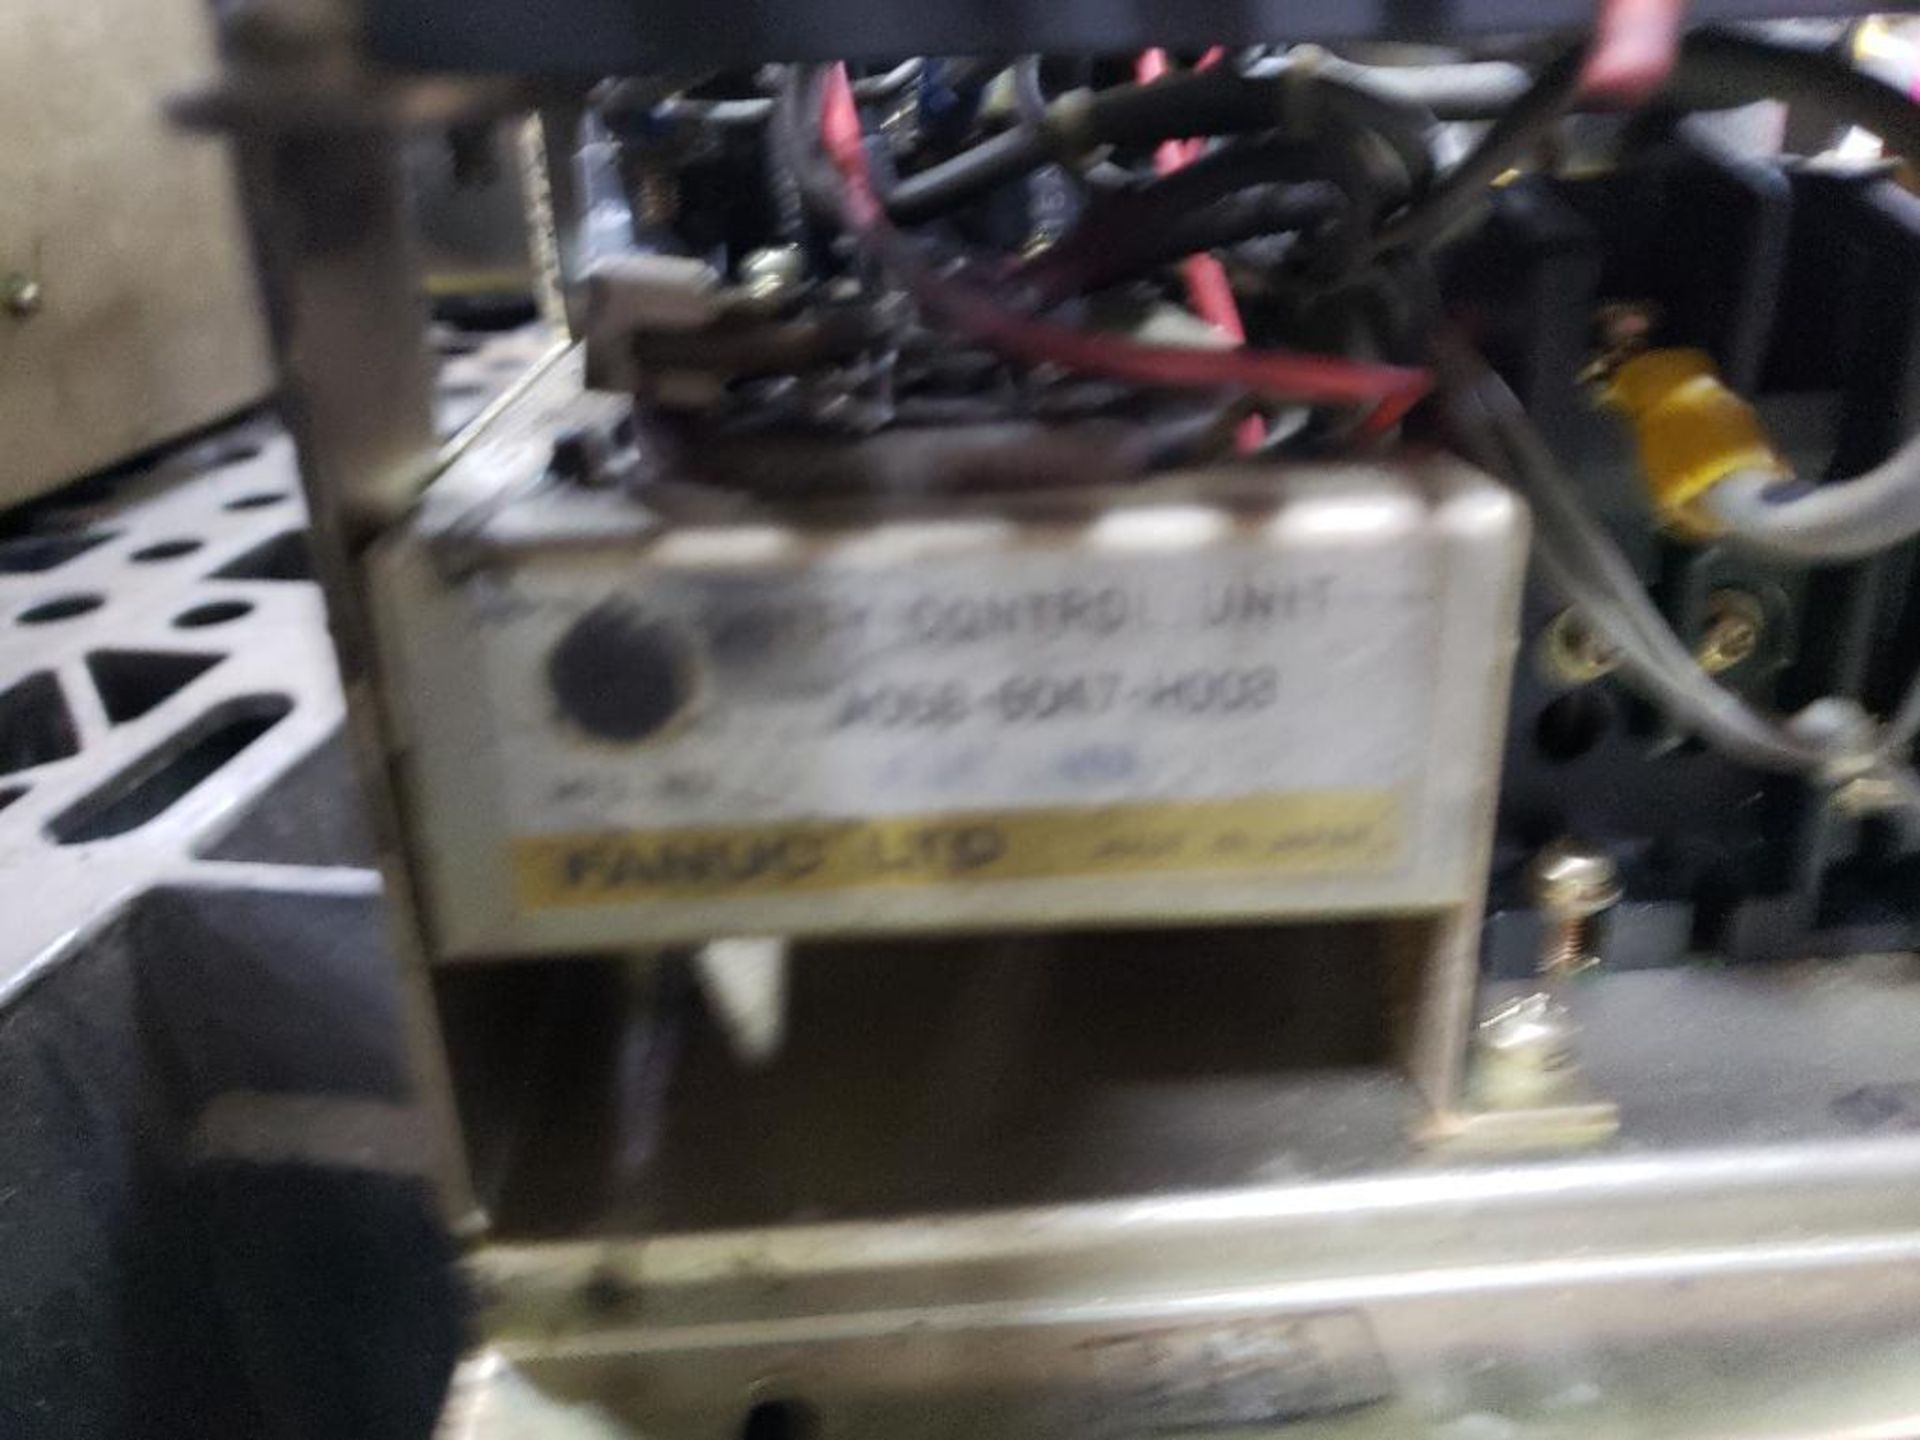 Fanuc velocity control unit model A06B-6047-H008. Pulled from working machine. - Image 3 of 5